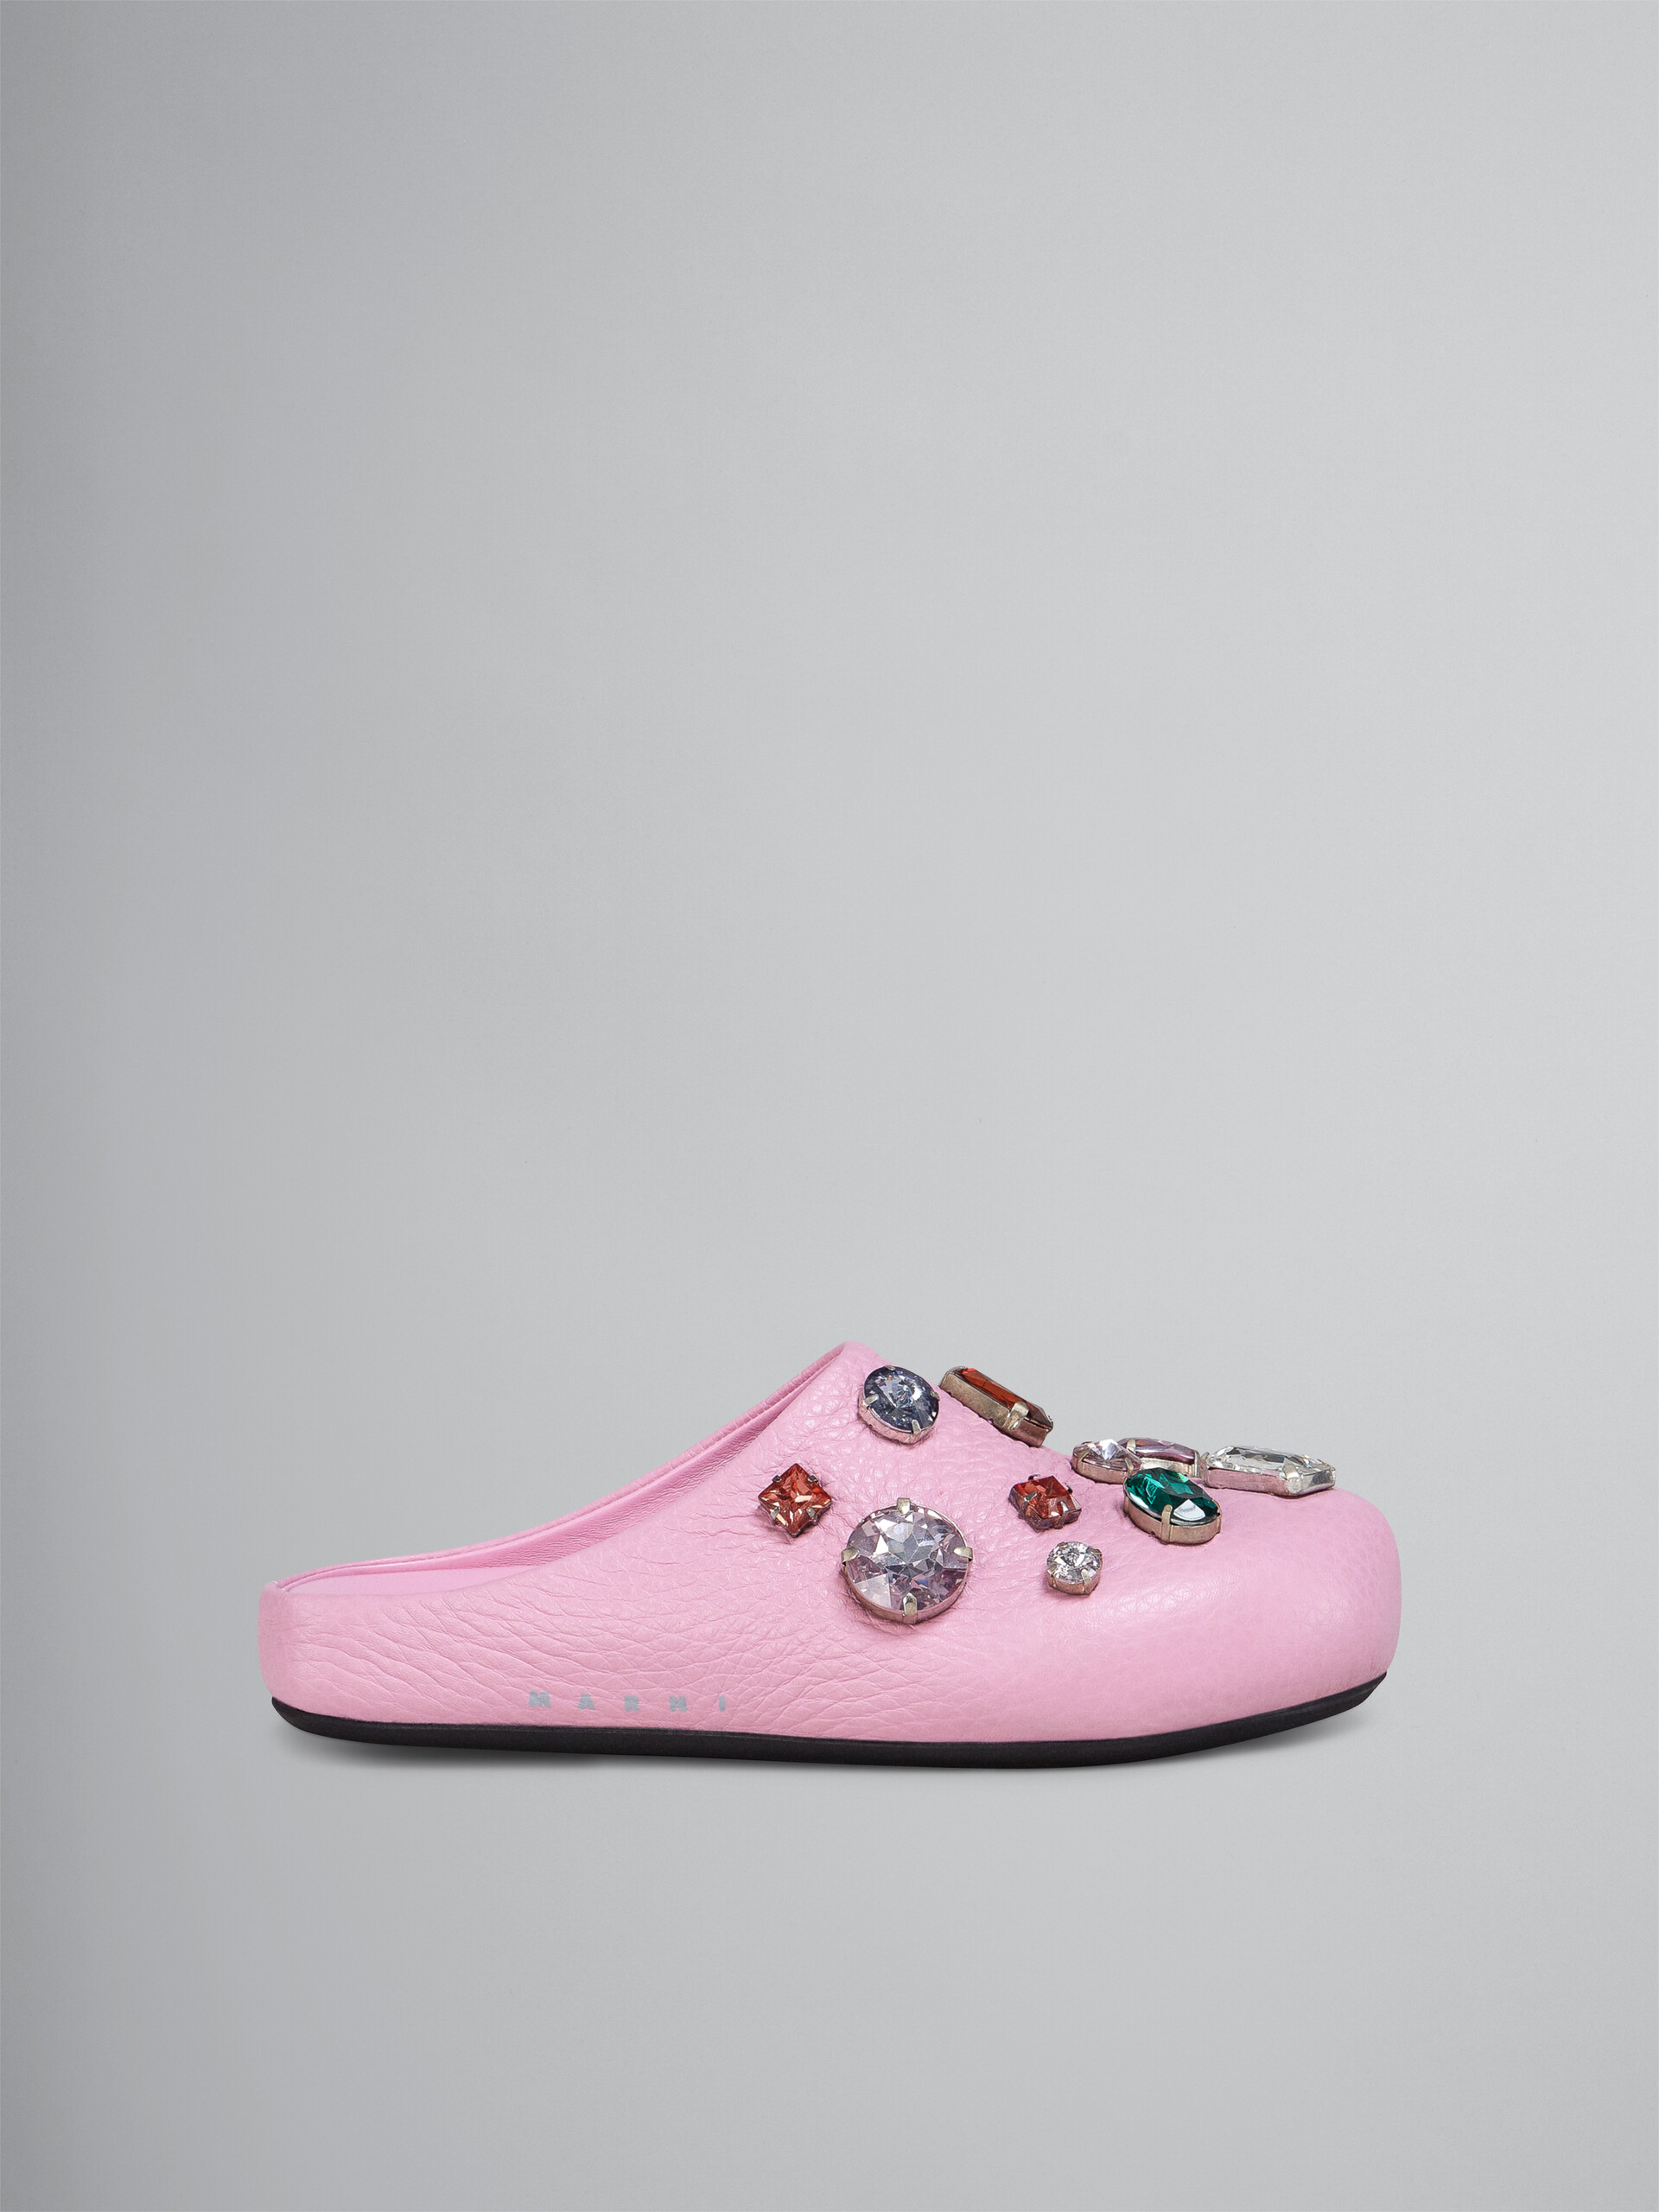 Pink leather Fussbett sabot with glass beads - Clogs - Image 1